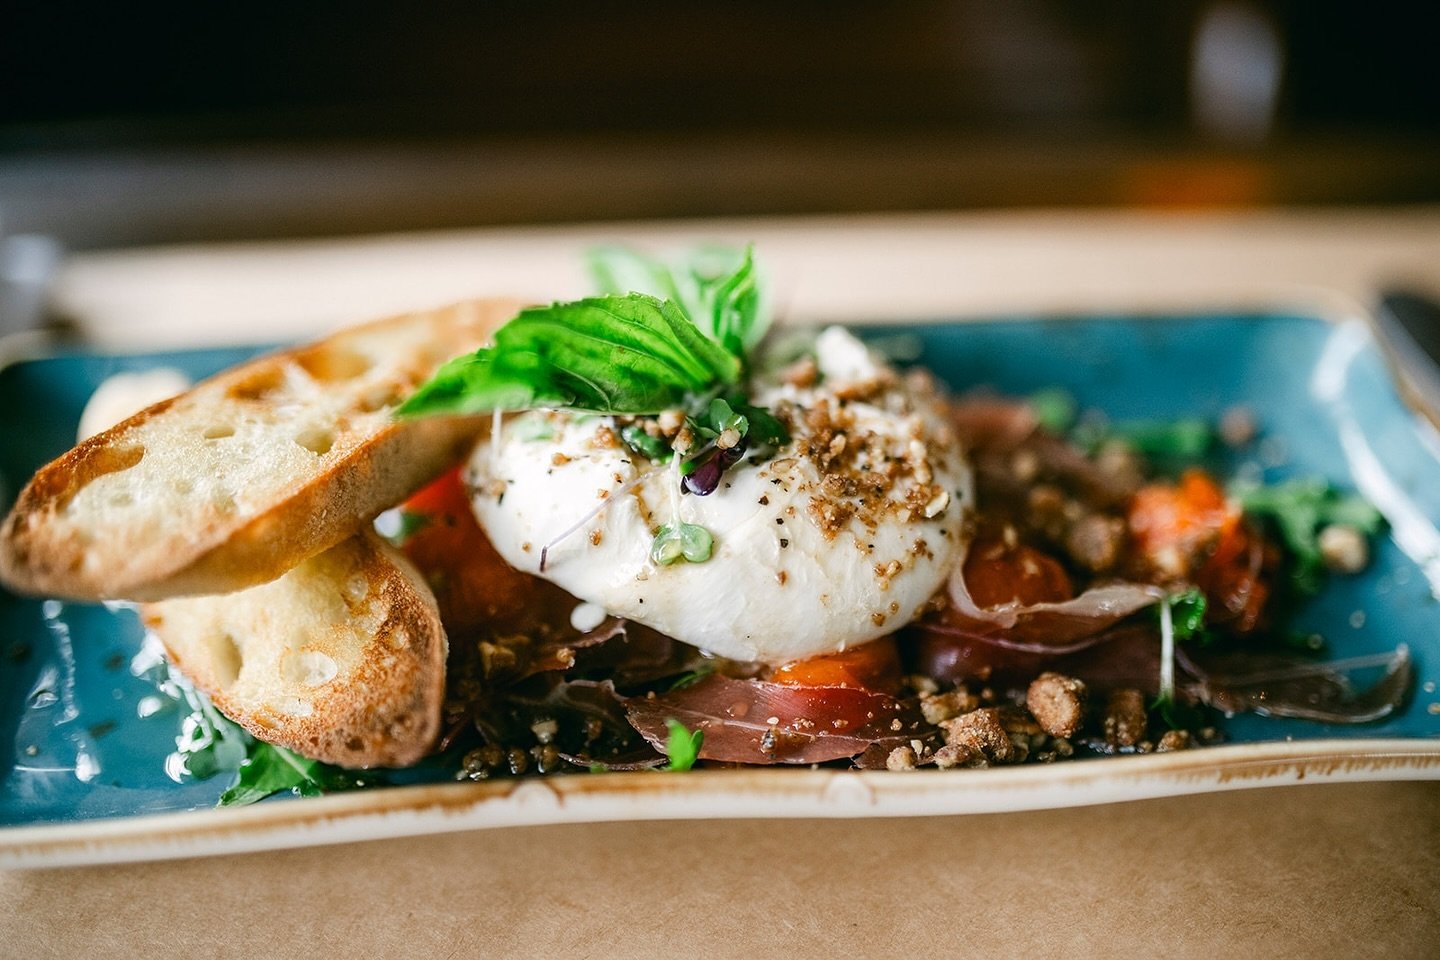 Burrata 

Prosciutto, Blistered Tomato, Basil, Candied Pecans, Sriracha Honey

Open at 5:00, Happy Hour Specials until 6:00 at the BAR! 

#oldfieldsofgreenlawn